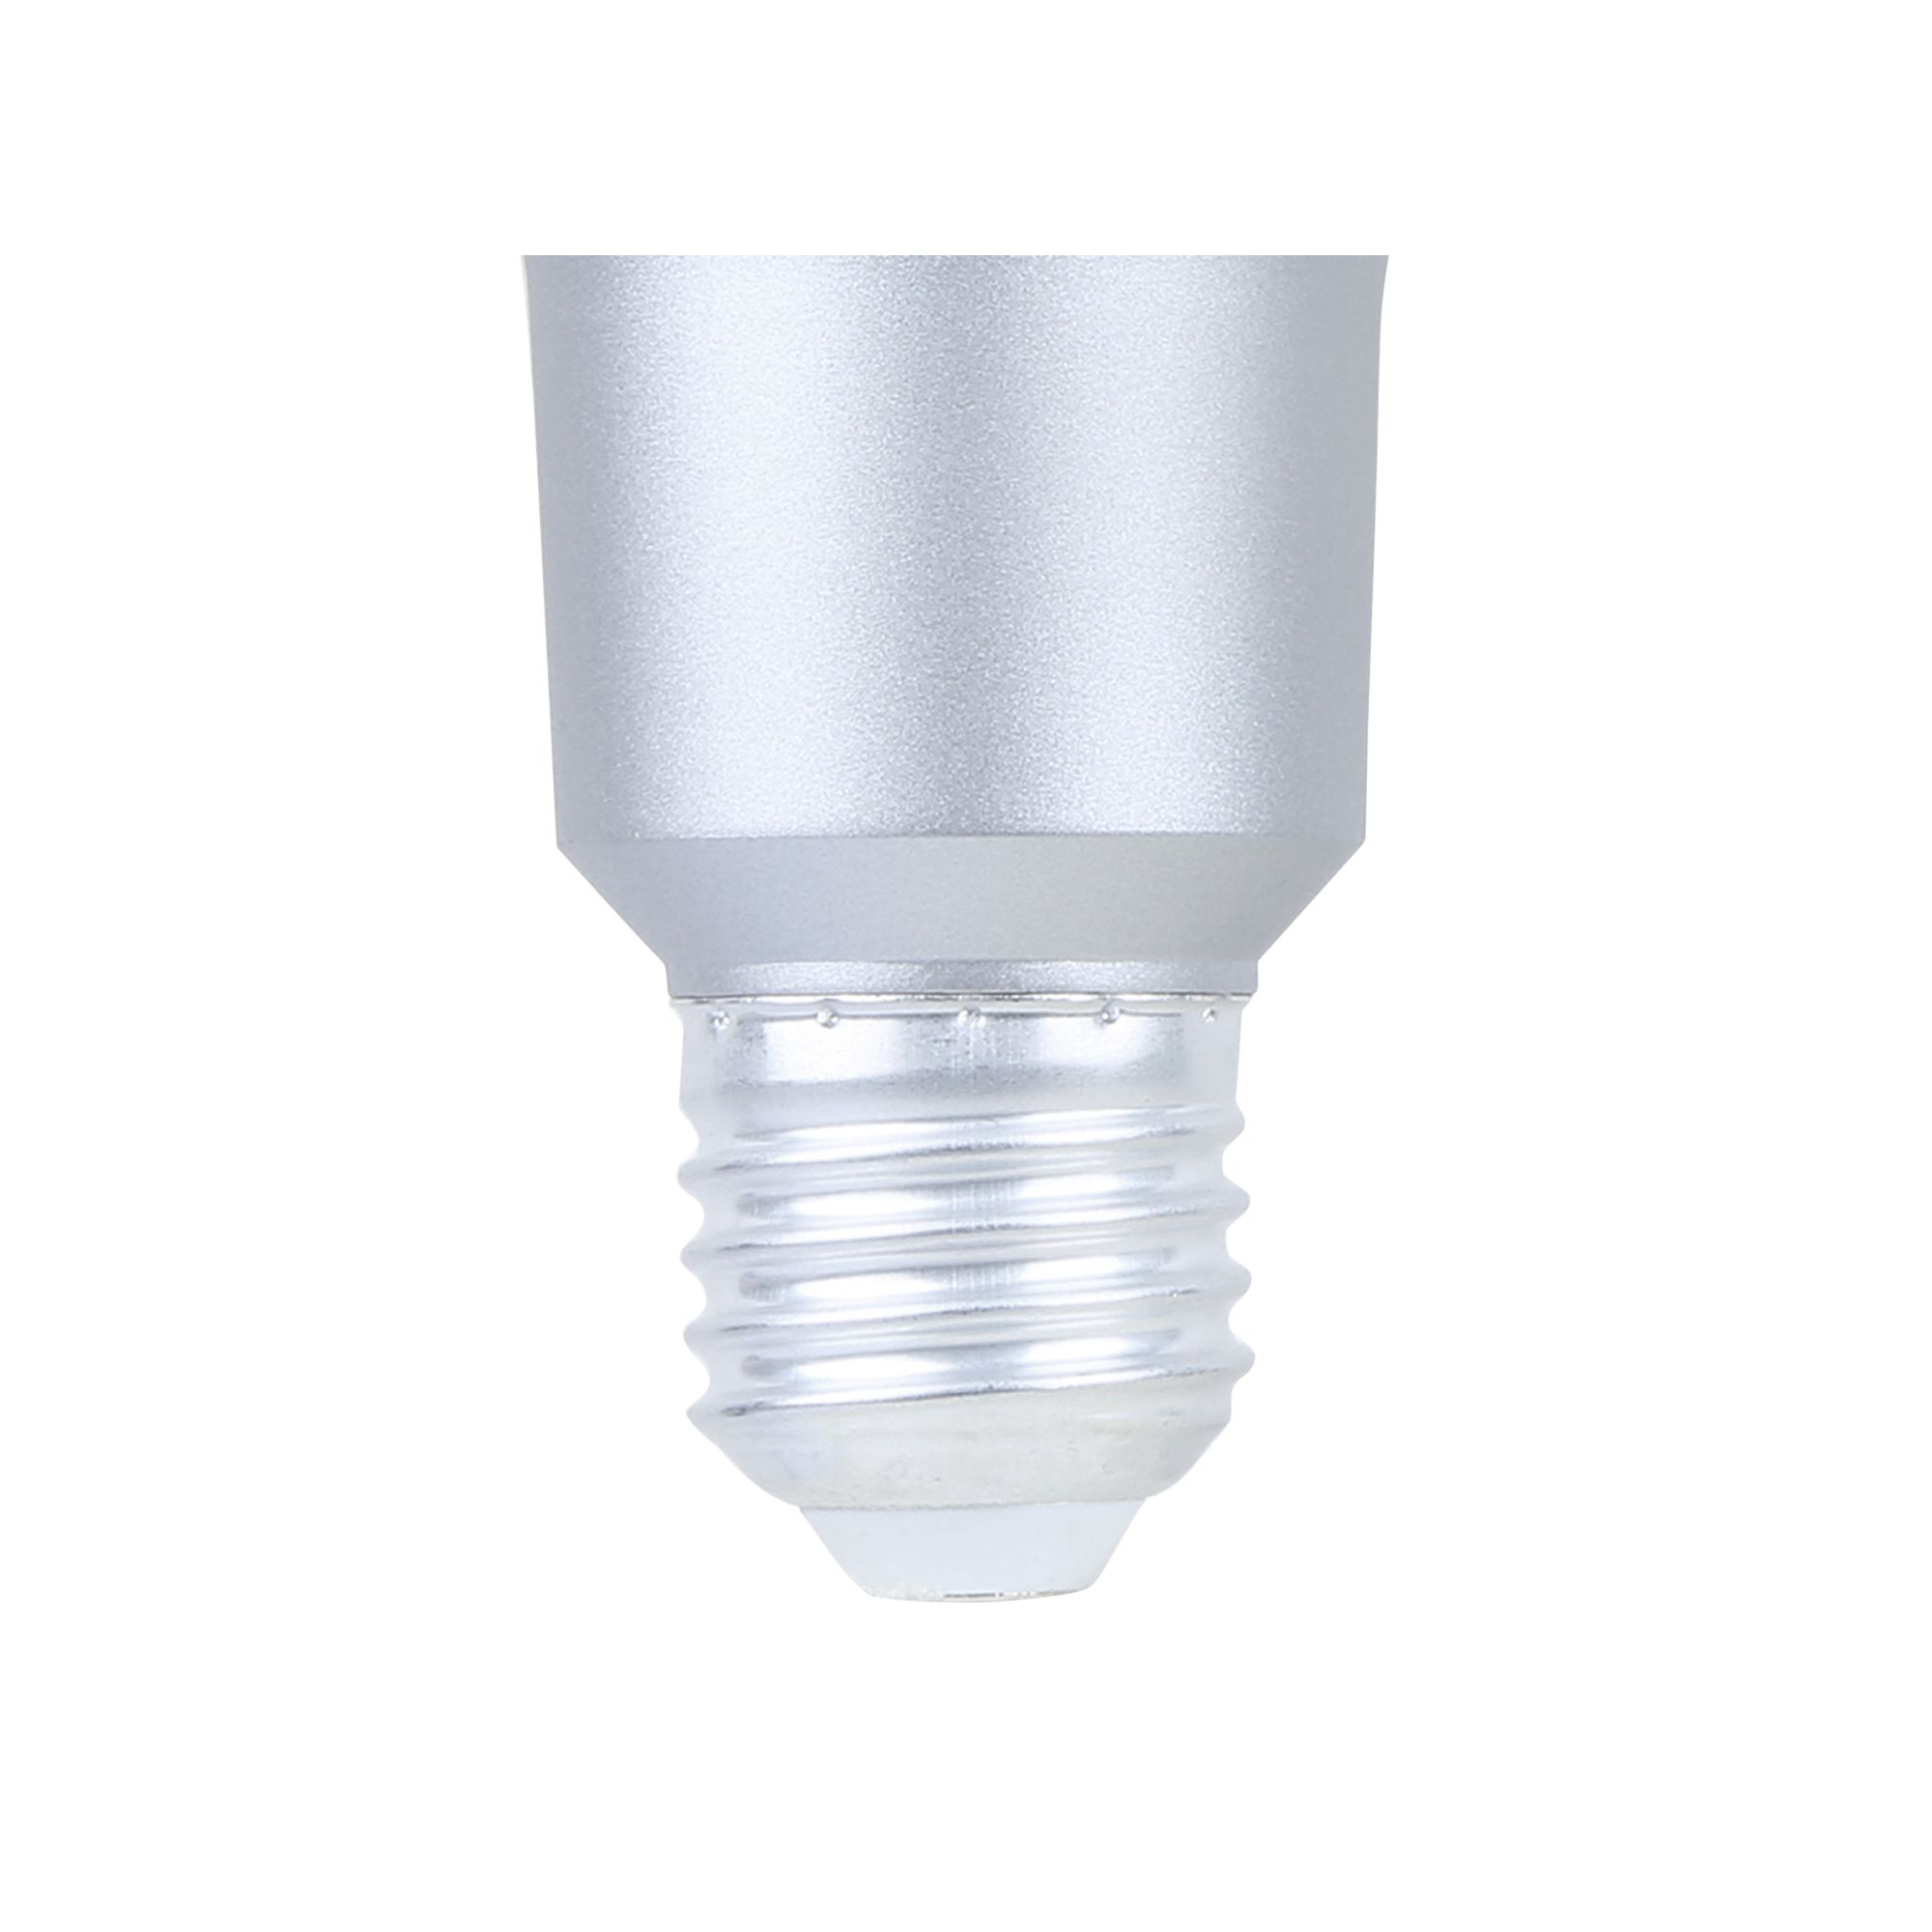 Diall 12.1W 1335lm Frosted Reflector (R80) Warm white LED Light bulb, Pack of 2